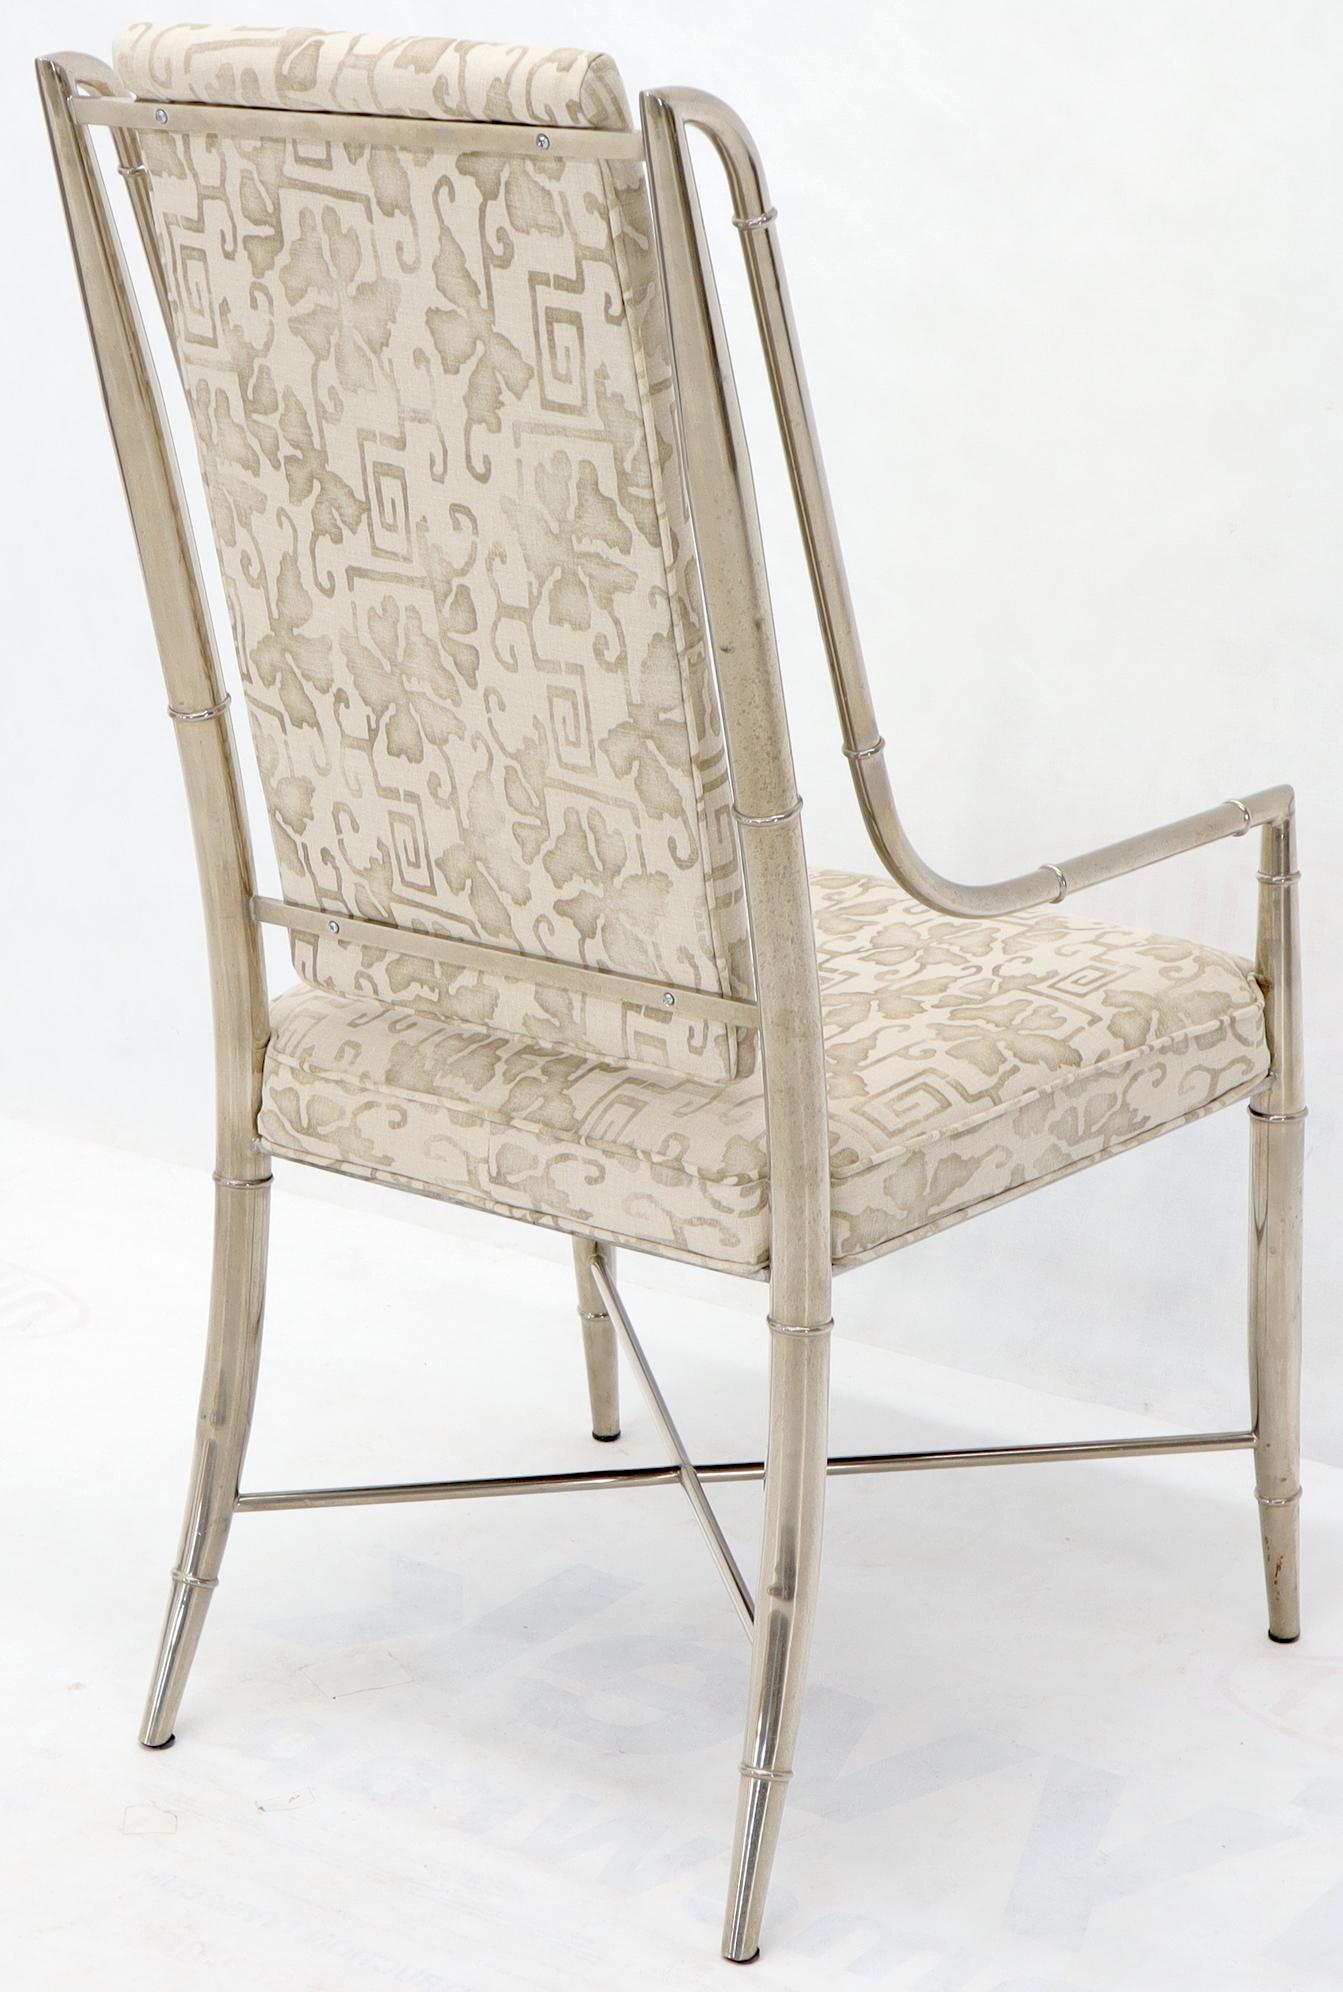 Polished Imperial Dining Room Chair by Weiman / Warren Lloyd for Mastercraft in Chrome